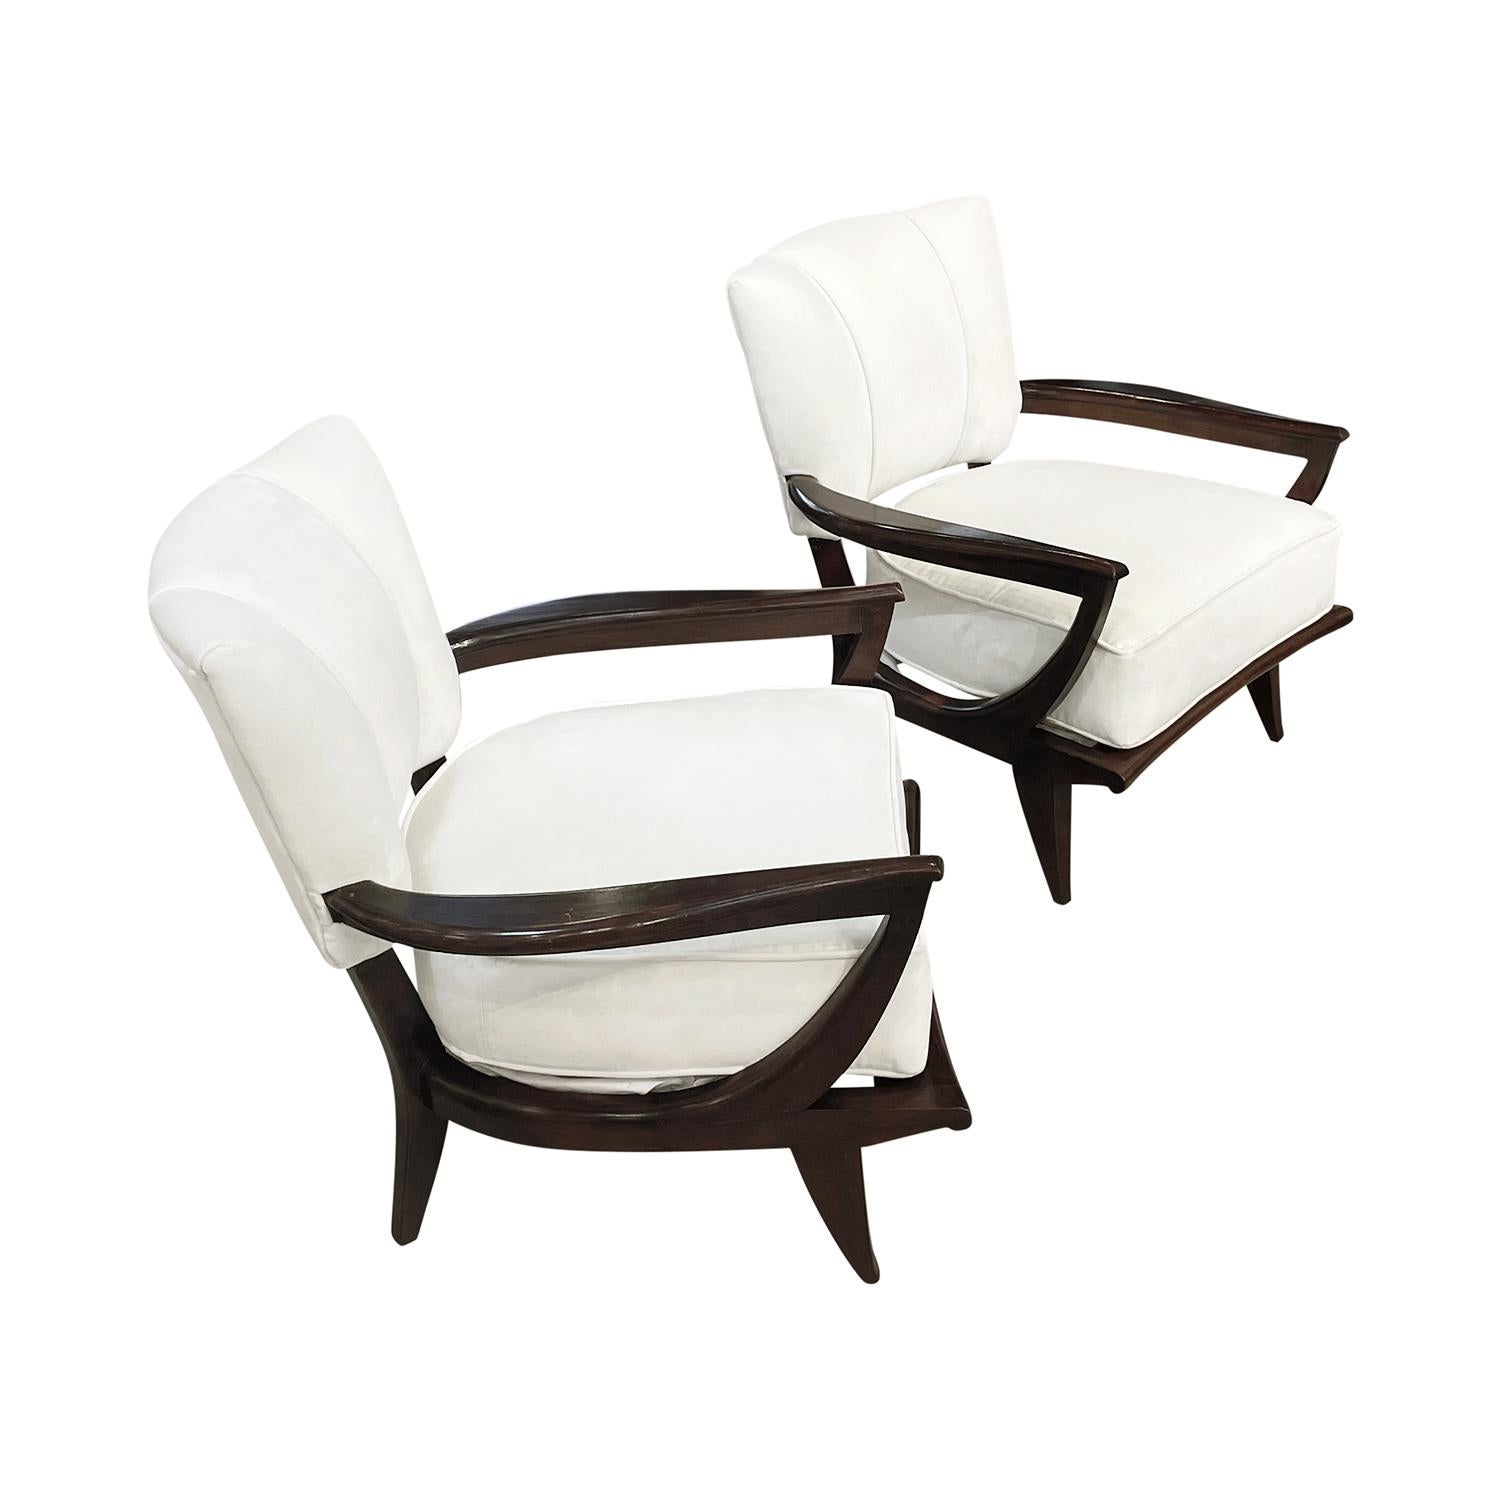 20th Century French Pair of Beech Armchairs by Etienne-Henri Martin & Steiner In Good Condition For Sale In West Palm Beach, FL